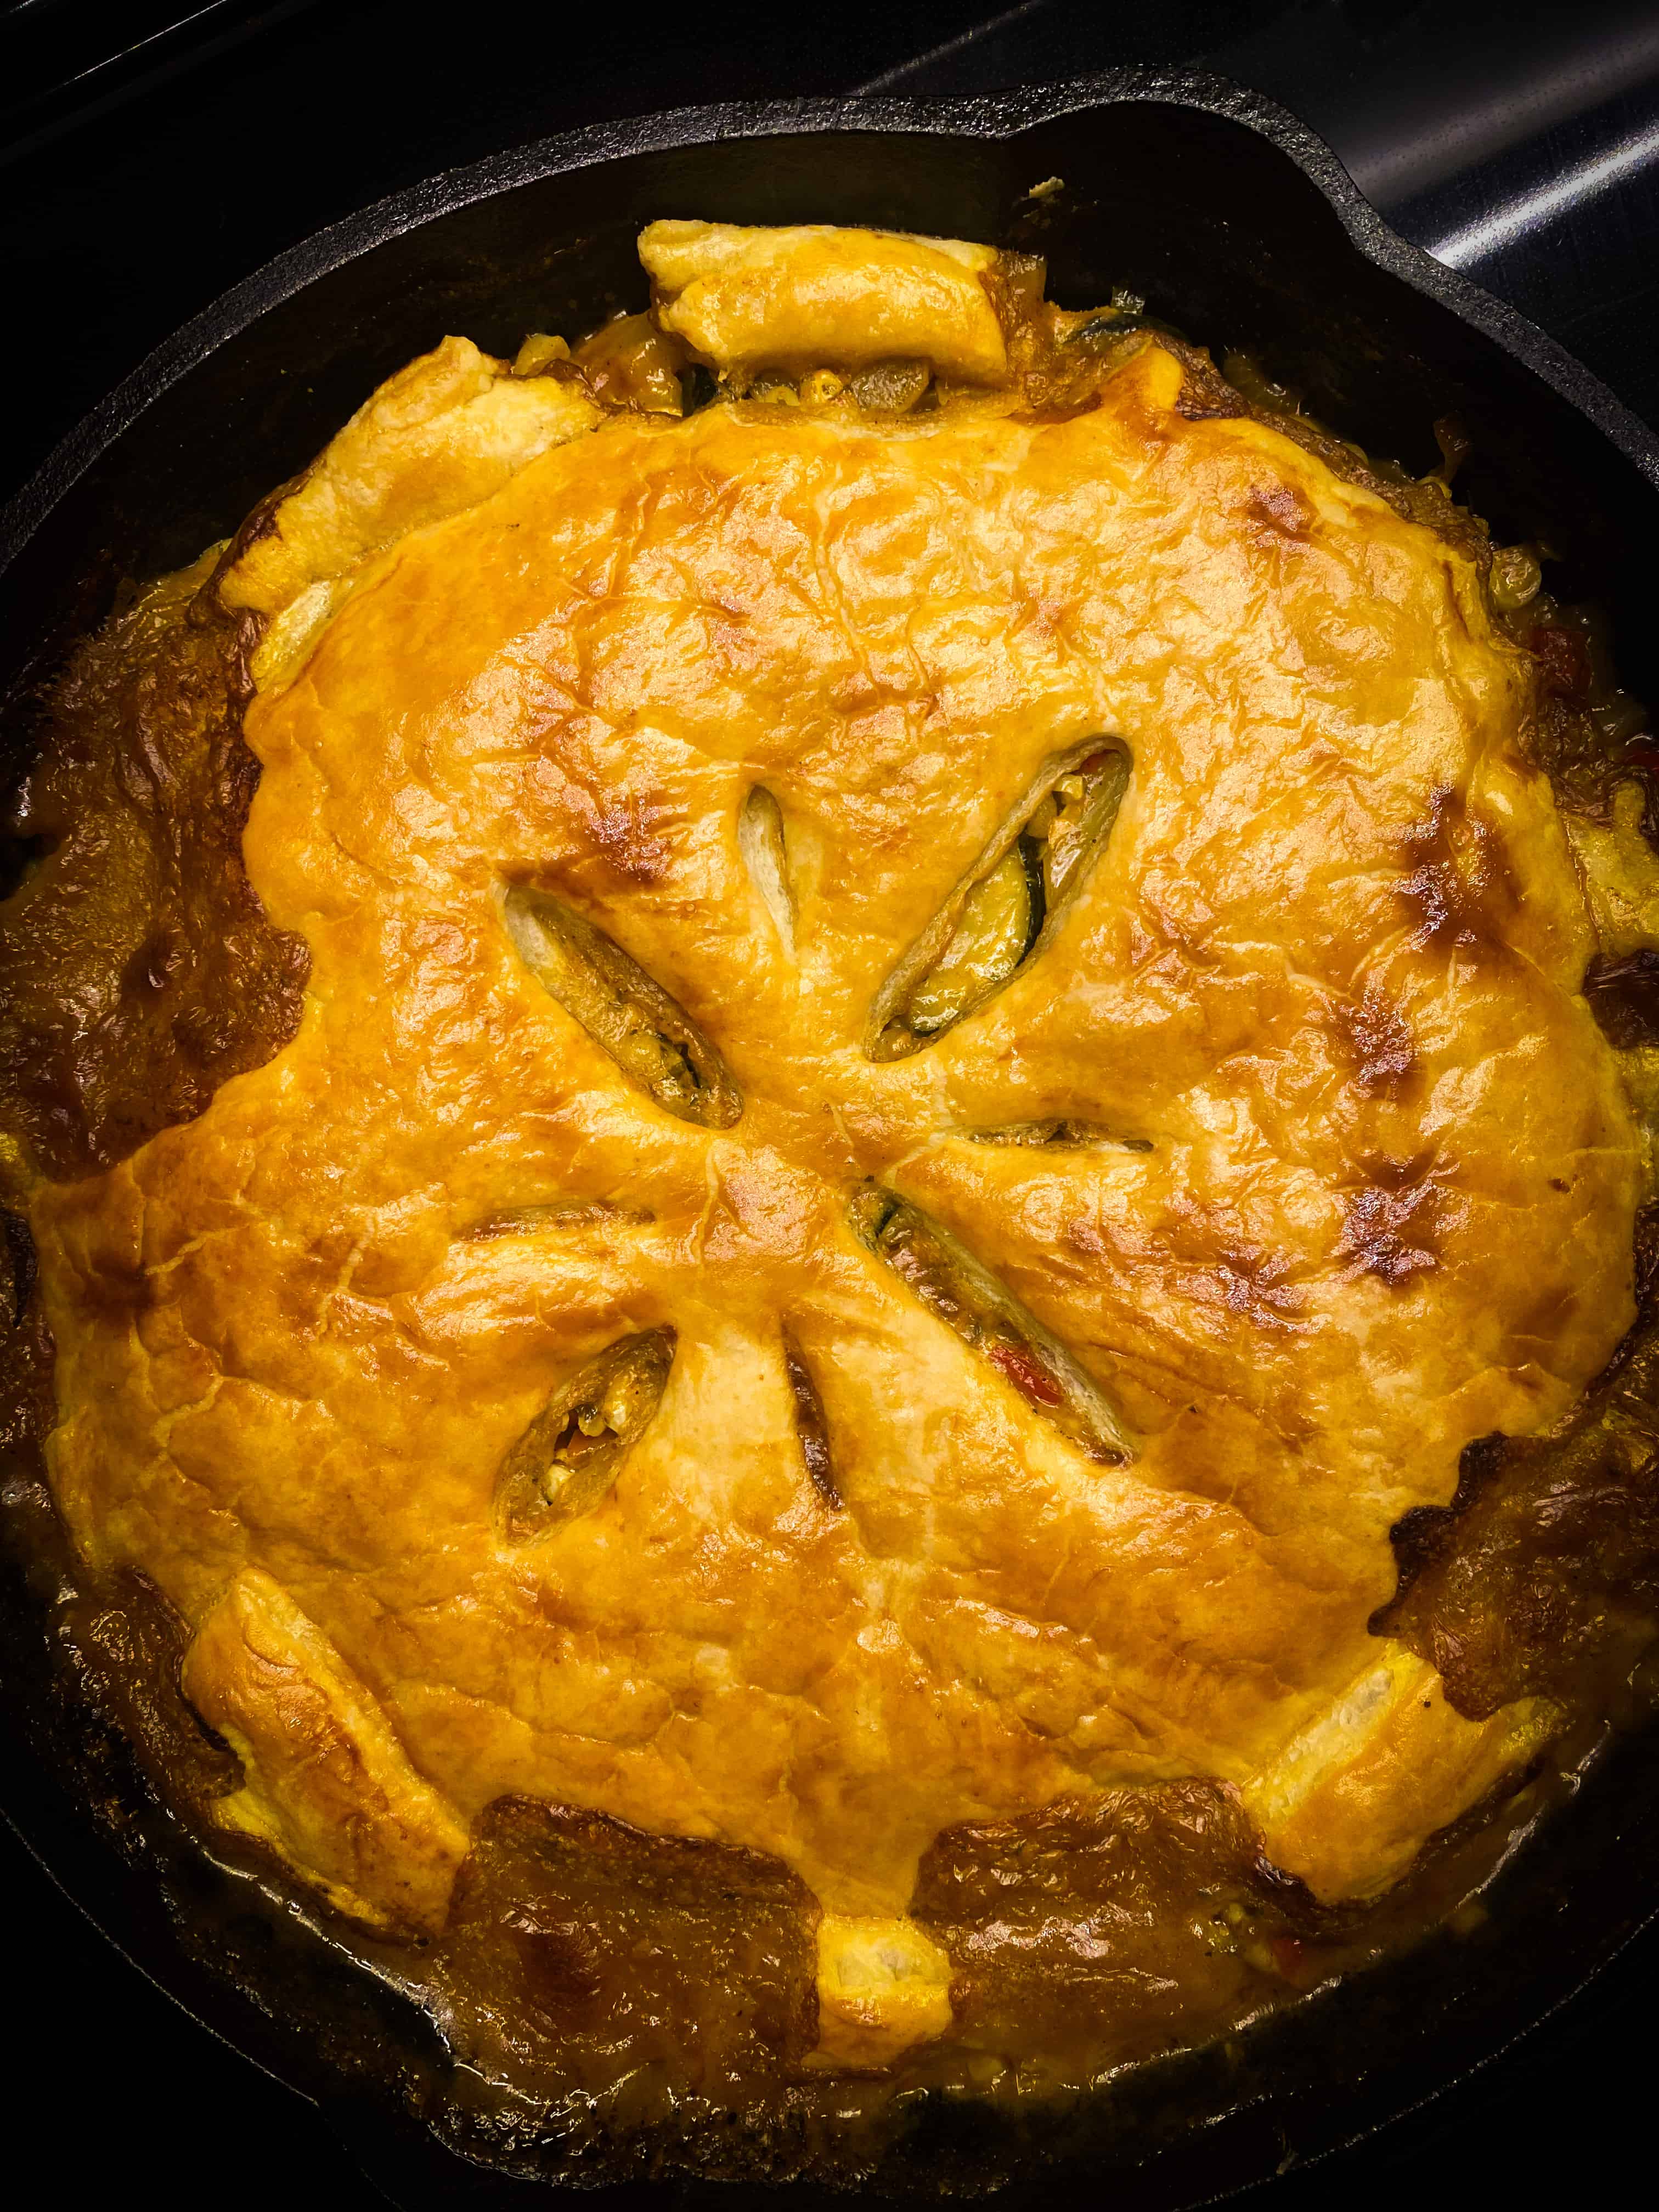 Look how pretty that egg washed pie crust looks, all bubbling over with cheesy, vegetable-y goodness! It's golden brown and perfect in the cast iron pan.